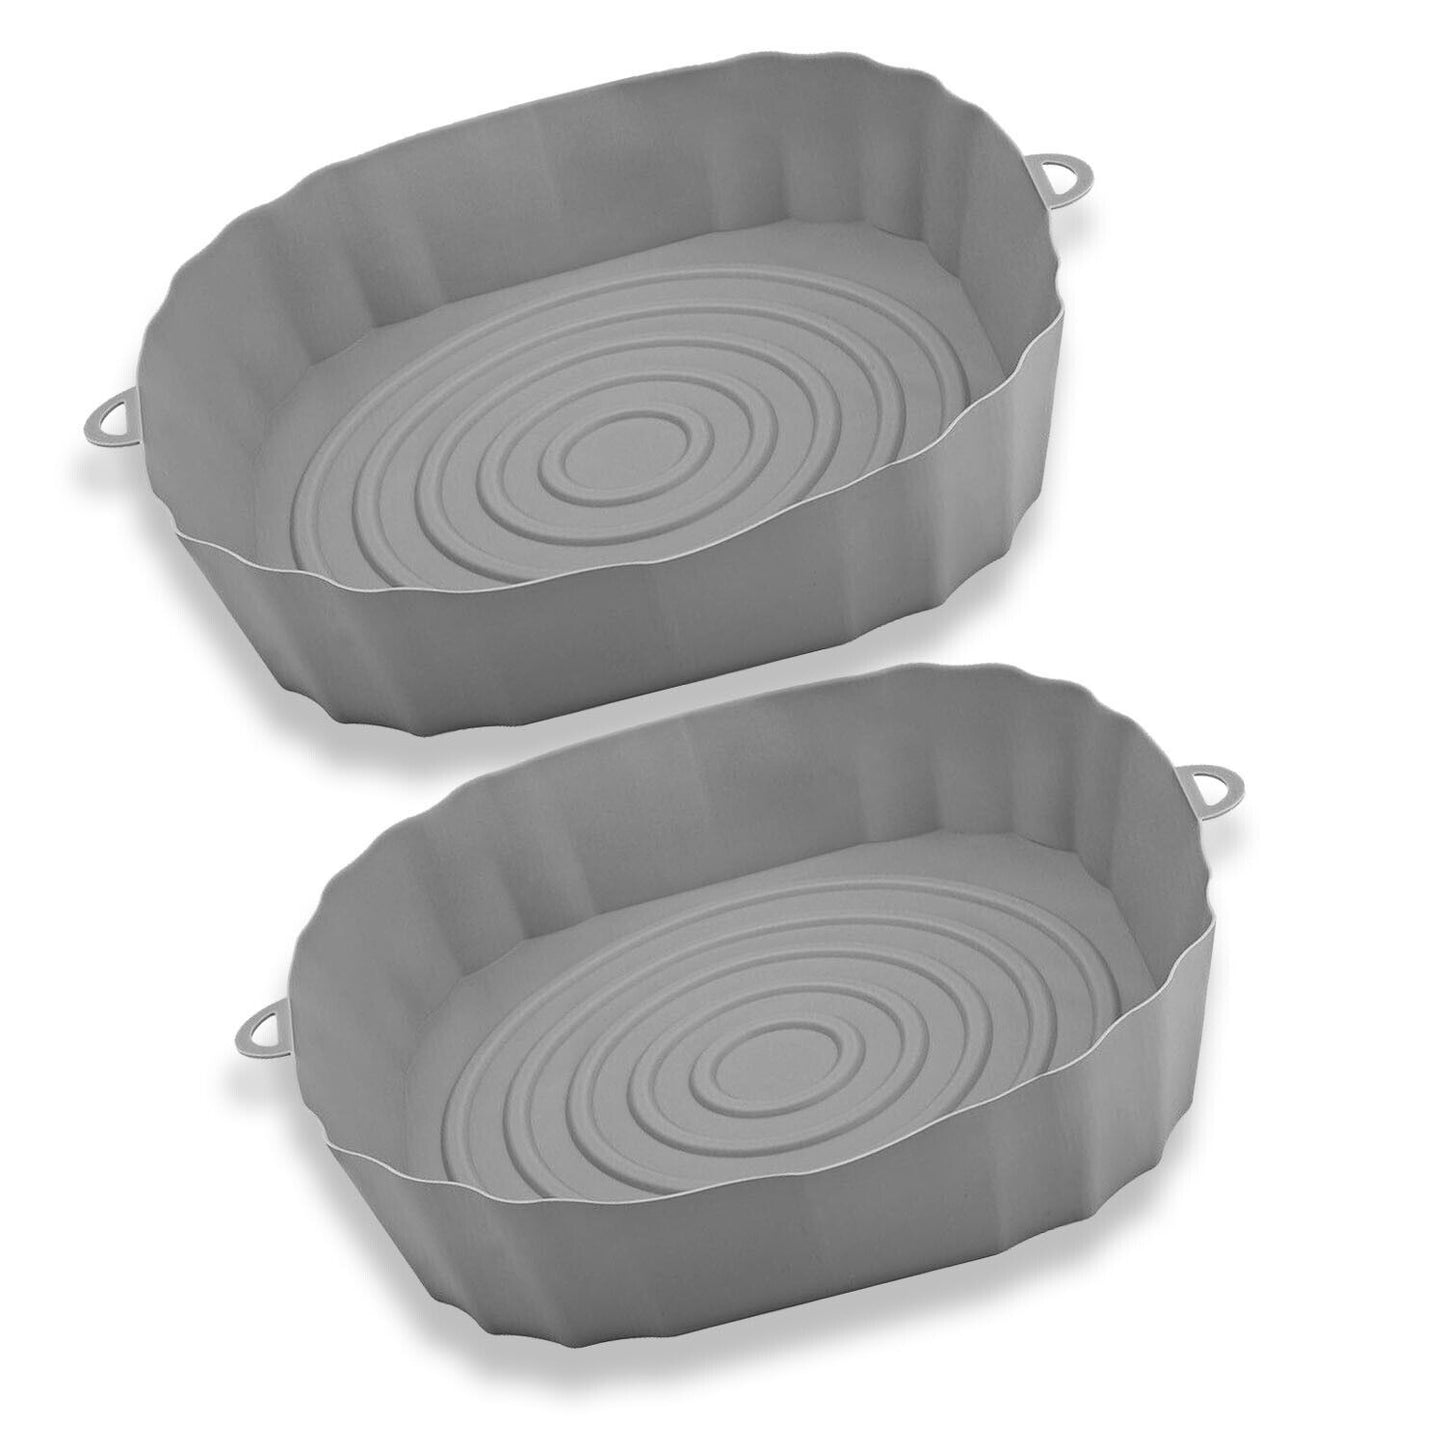 2 PCS Air Fryer Silicone Liners Reusable Air Fryer Silicone Pot Baking Tray Mat